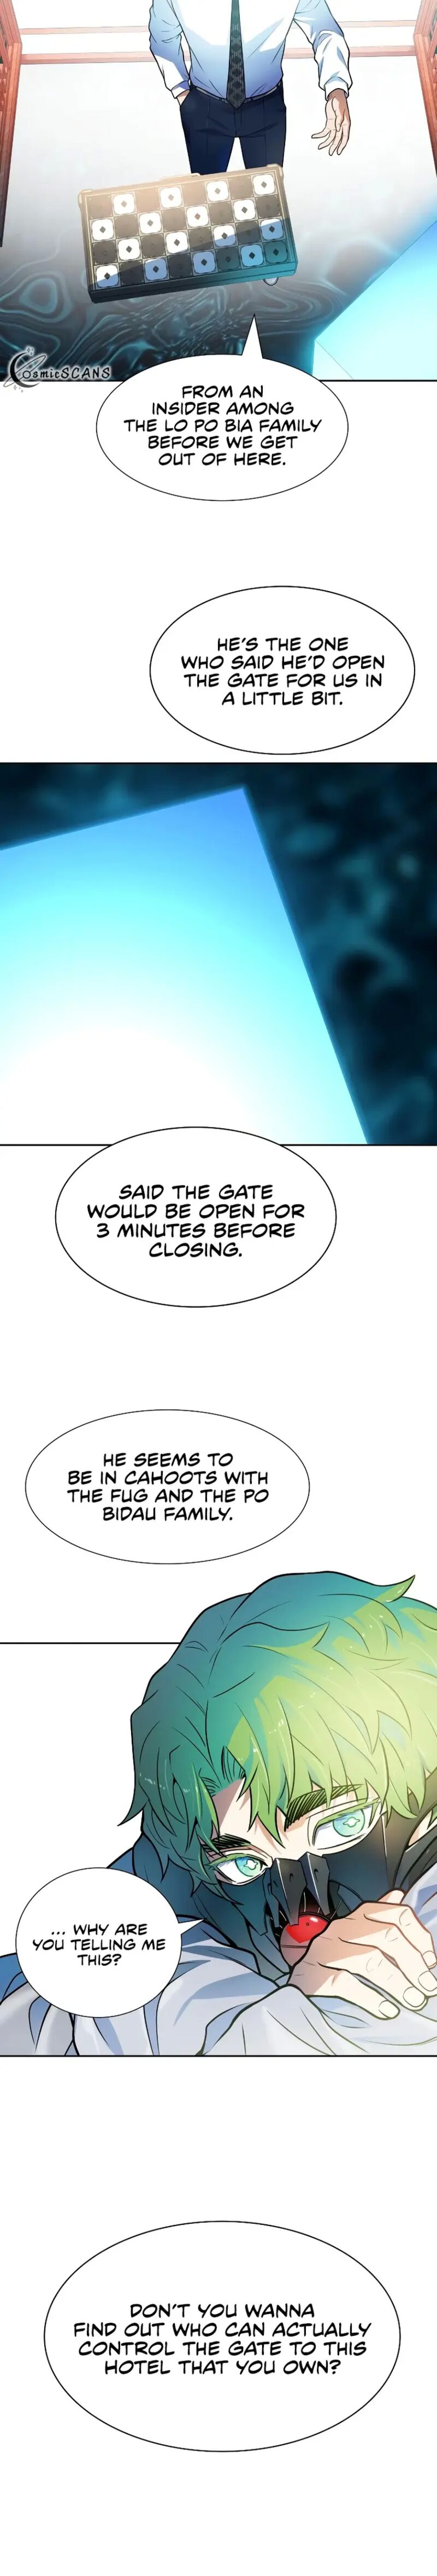 Tower Of God 572 8